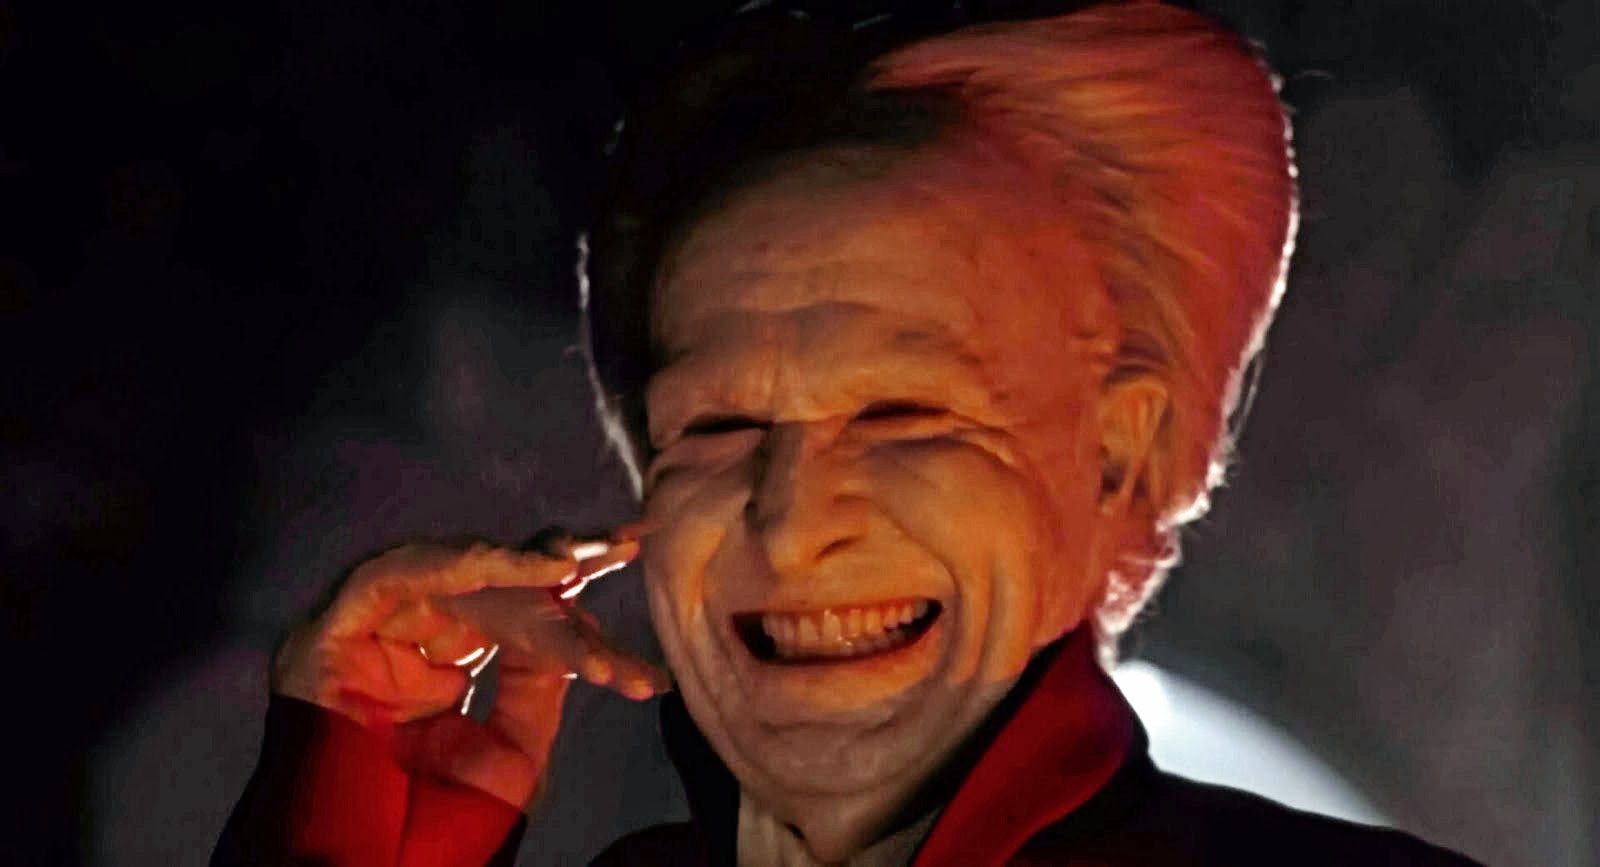 When you think Gary Oldman is Dracula and not Commissioner Gordon